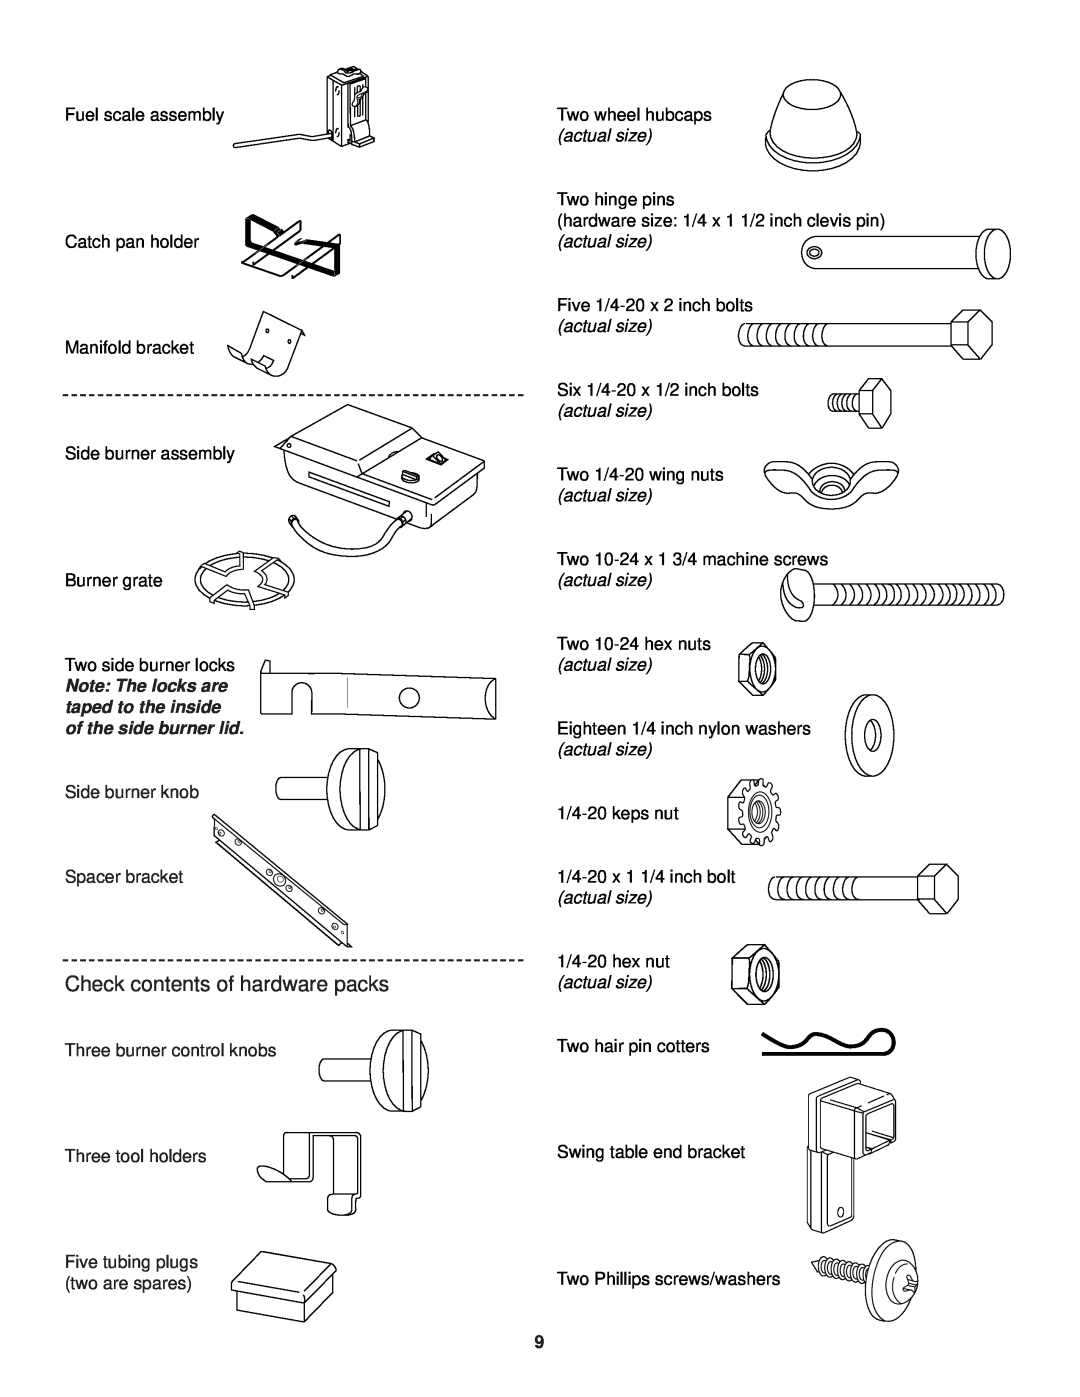 Weber 98642 owner manual Check contents of hardware packs 